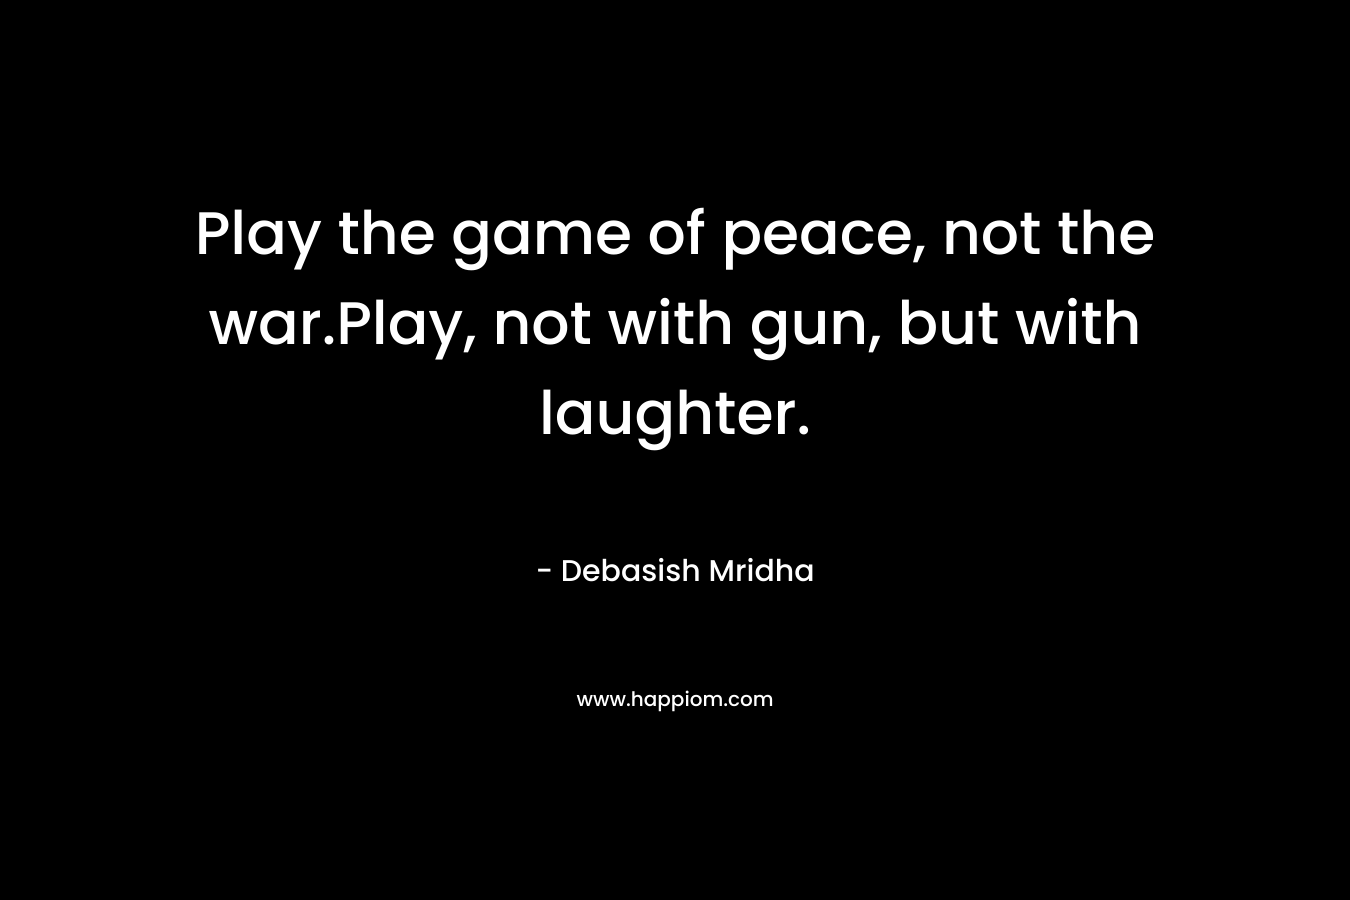 Play the game of peace, not the war.Play, not with gun, but with laughter.